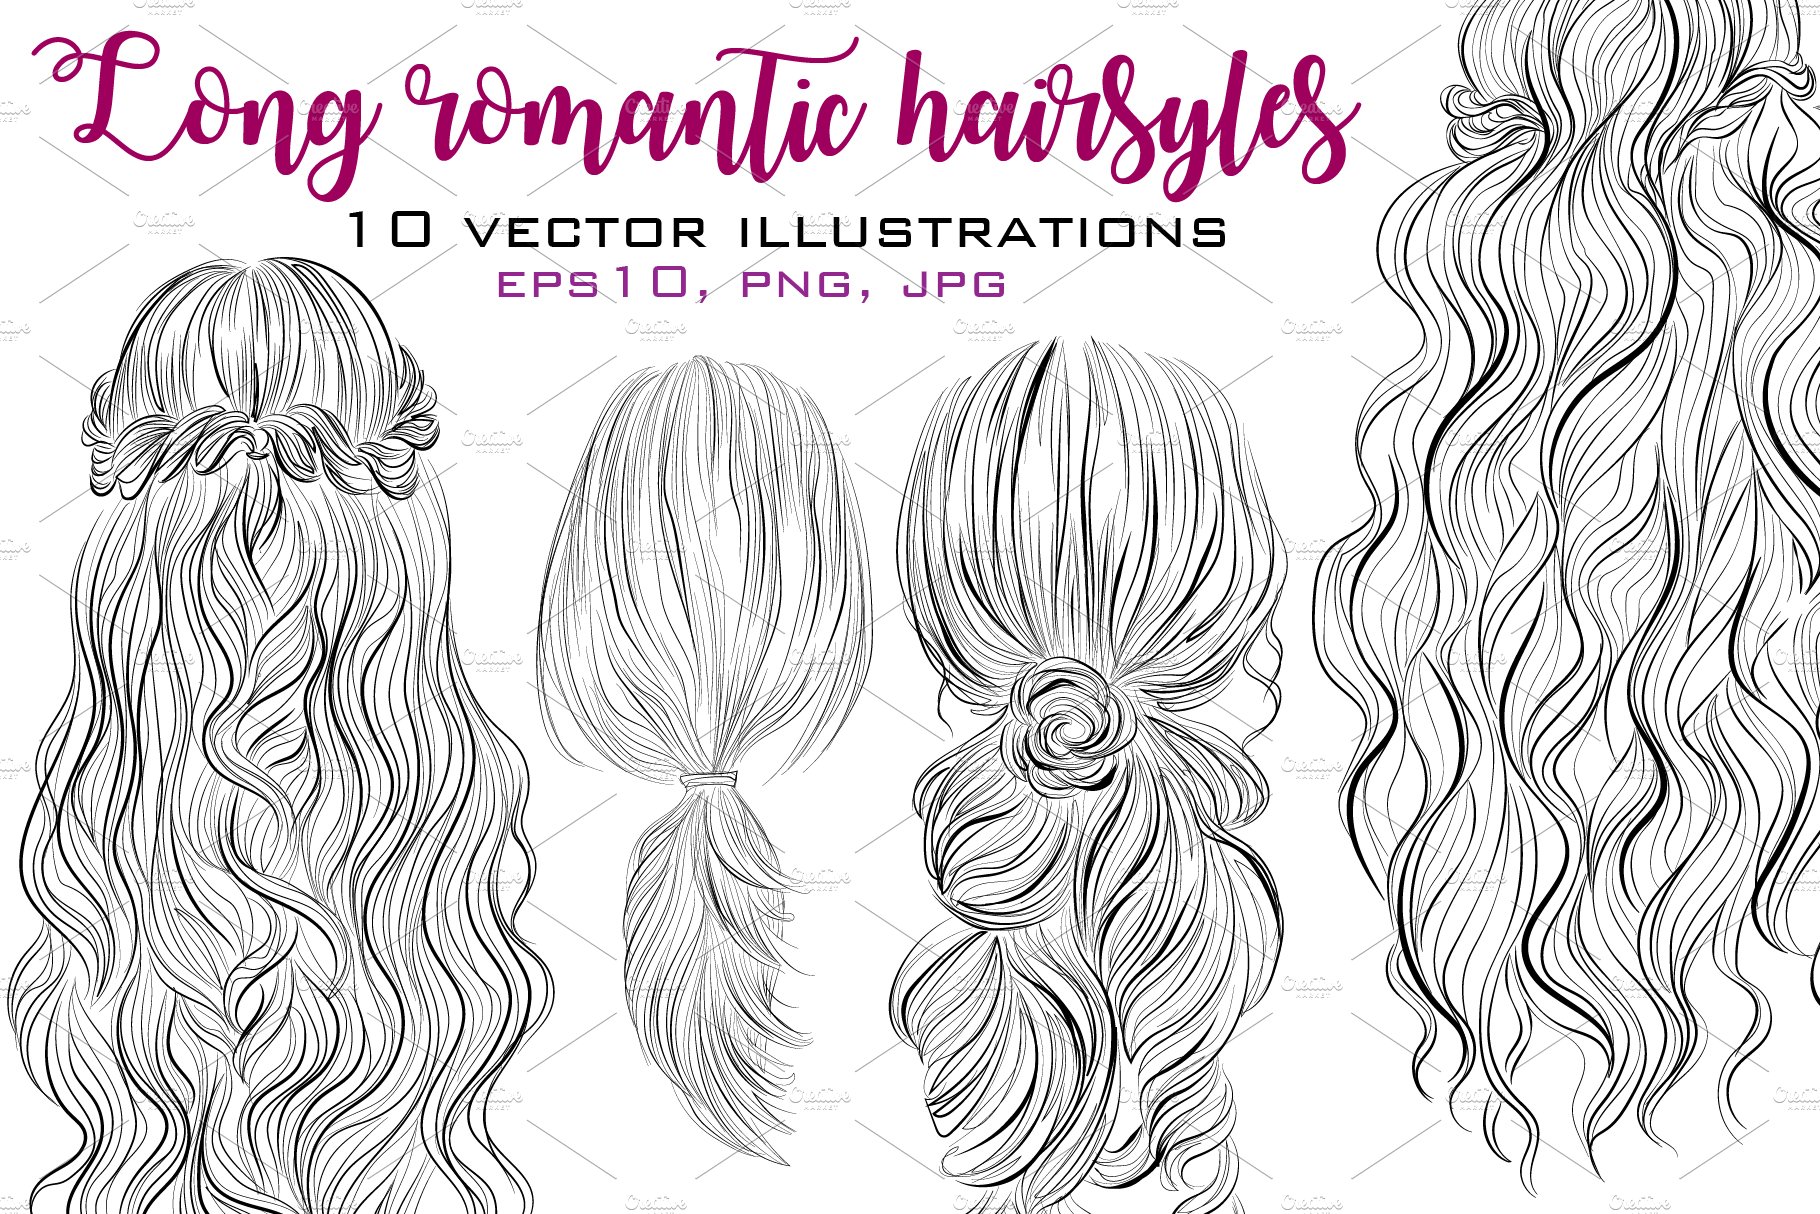 10 Long romantic hairstyles cover image.